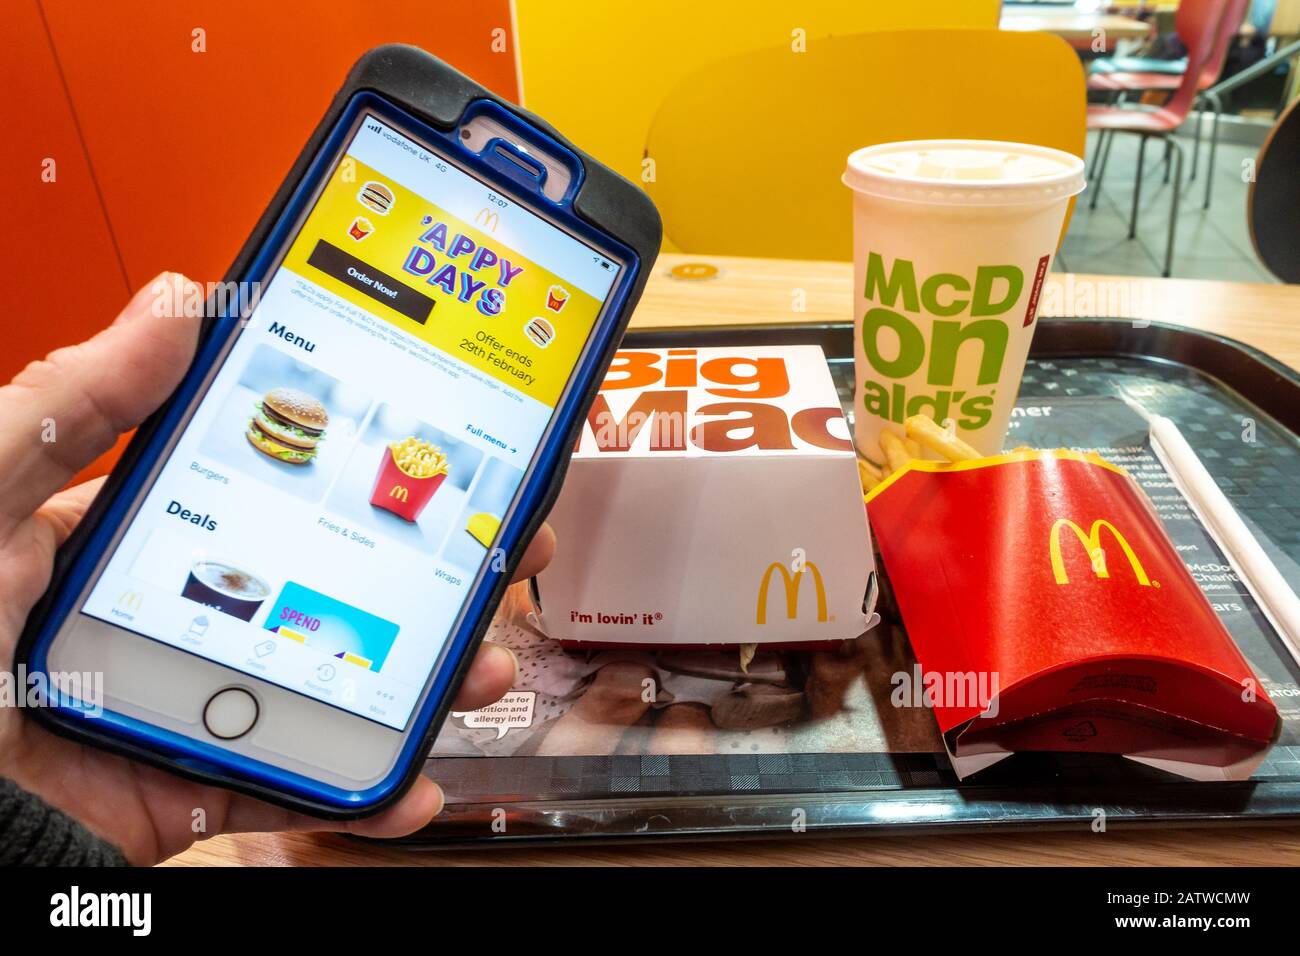 A hand holding a mobile phone with the McDonalds app in front of a a Big Mac meal in a <cDonalds fast food restaurant. Stock Photo